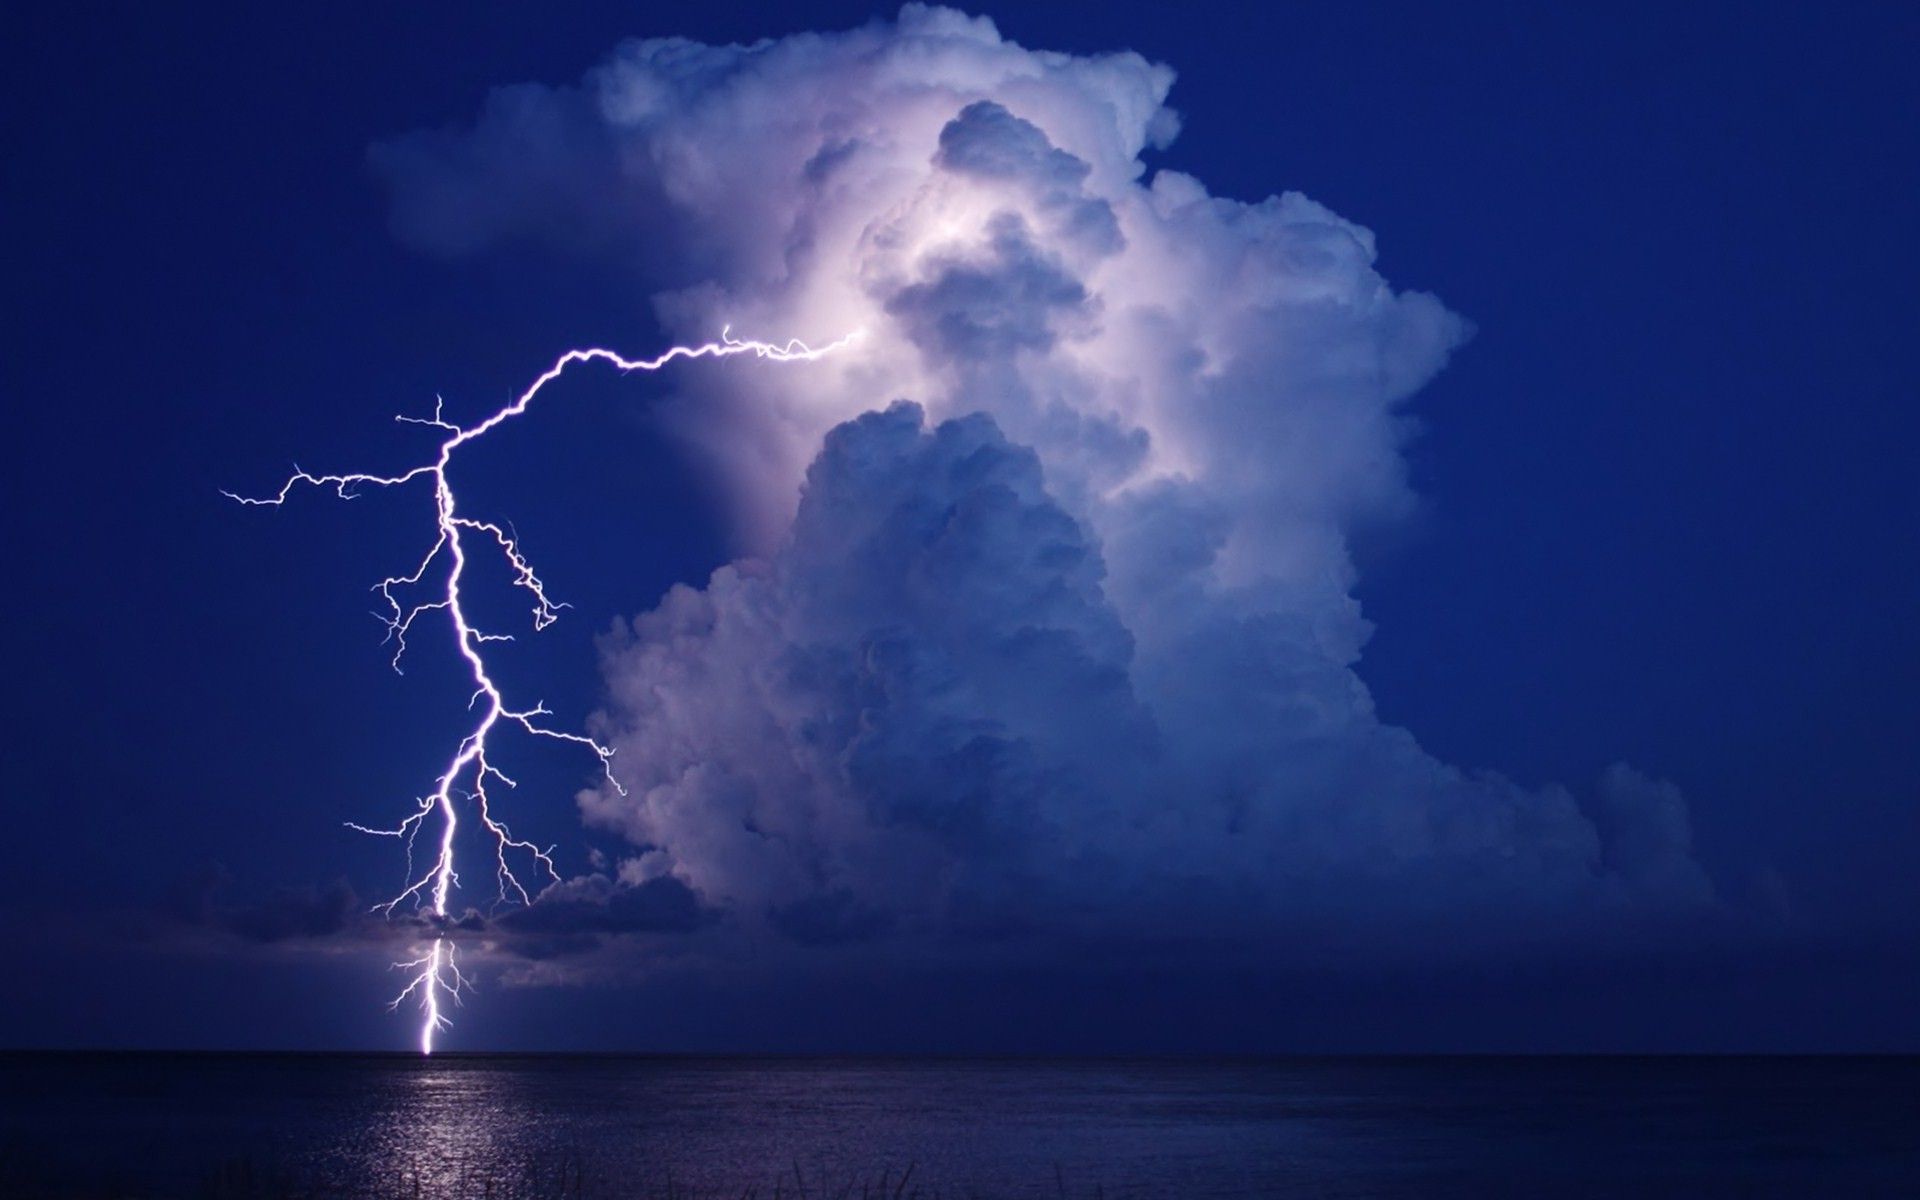 A lightning bolt strikes the ocean in front of a large cloud. - Lightning